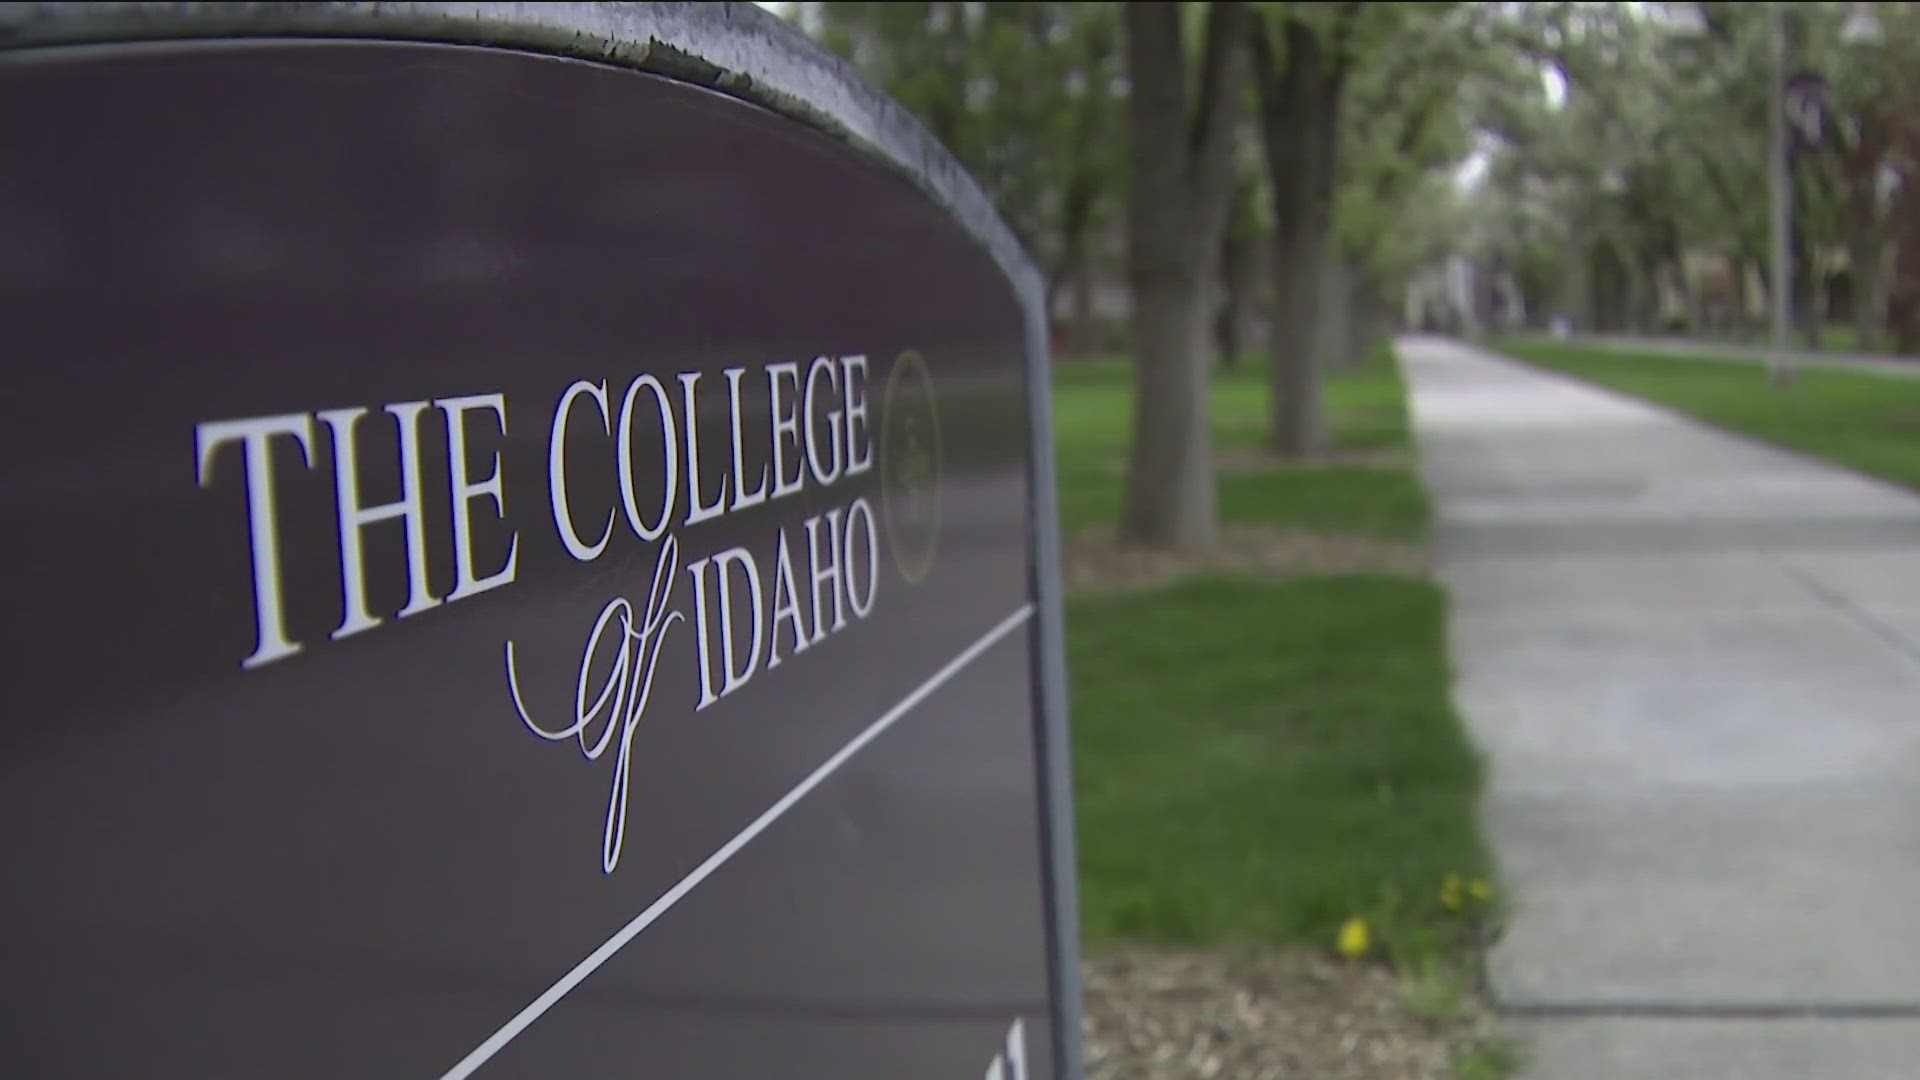 The Doctor of Medical Science degree program begins this summer and marks the College of Idaho's first doctoral offering in its 133-year history.